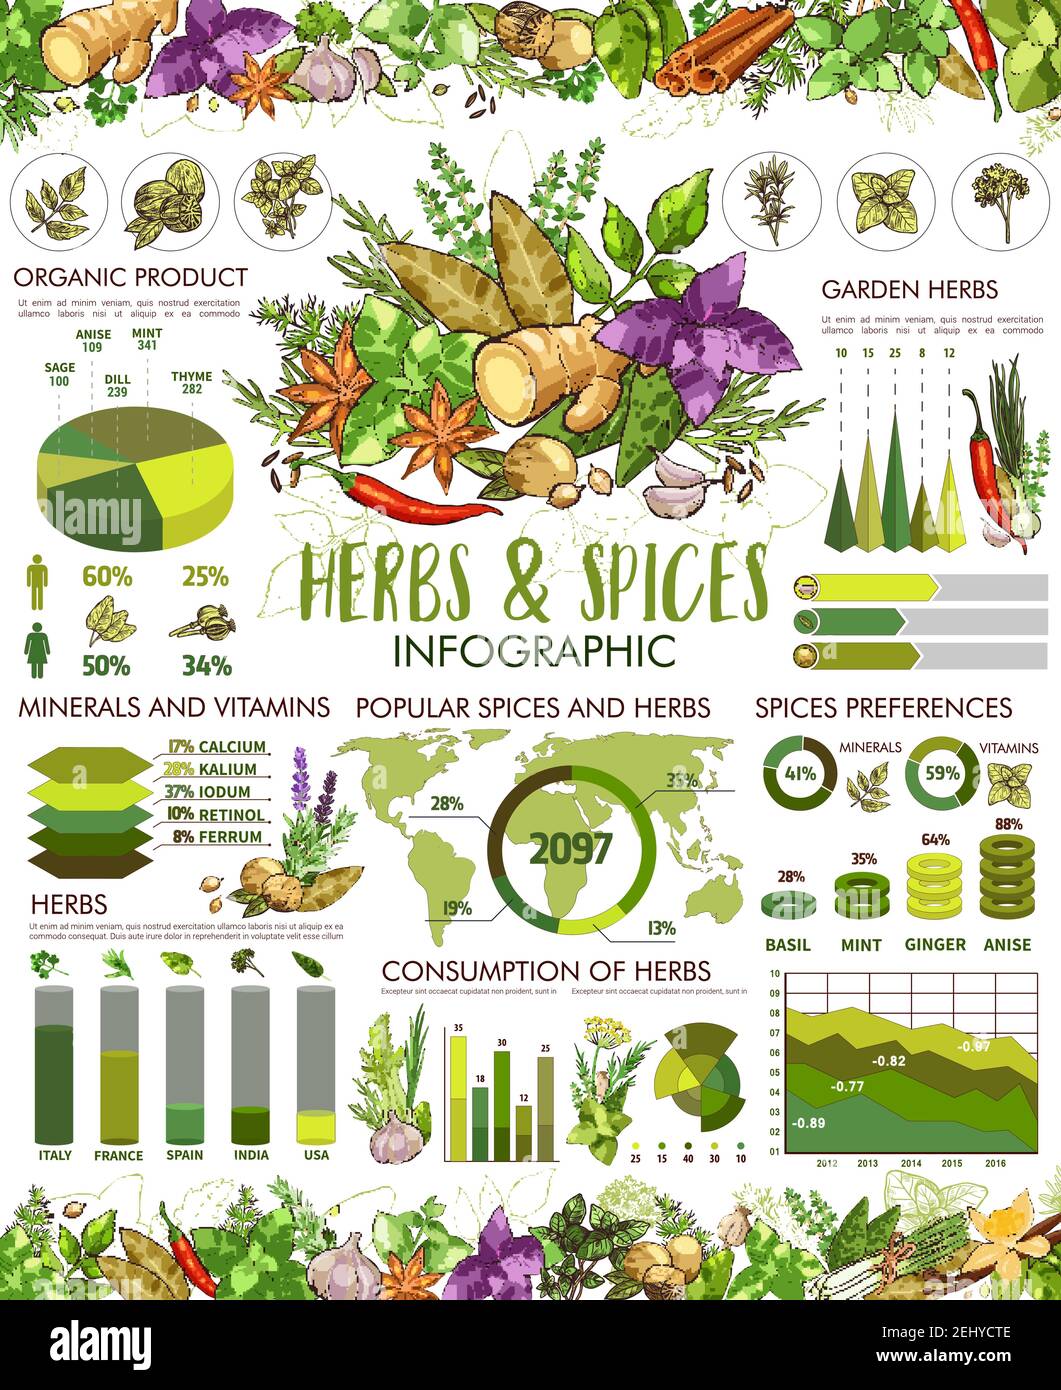 https://c8.alamy.com/comp/2EHYCTE/herbs-and-spice-infographic-cooking-seasonings-vector-anise-star-and-basil-mint-and-chili-pepper-rosemary-and-parsley-charts-garlic-and-ginger-d-2EHYCTE.jpg